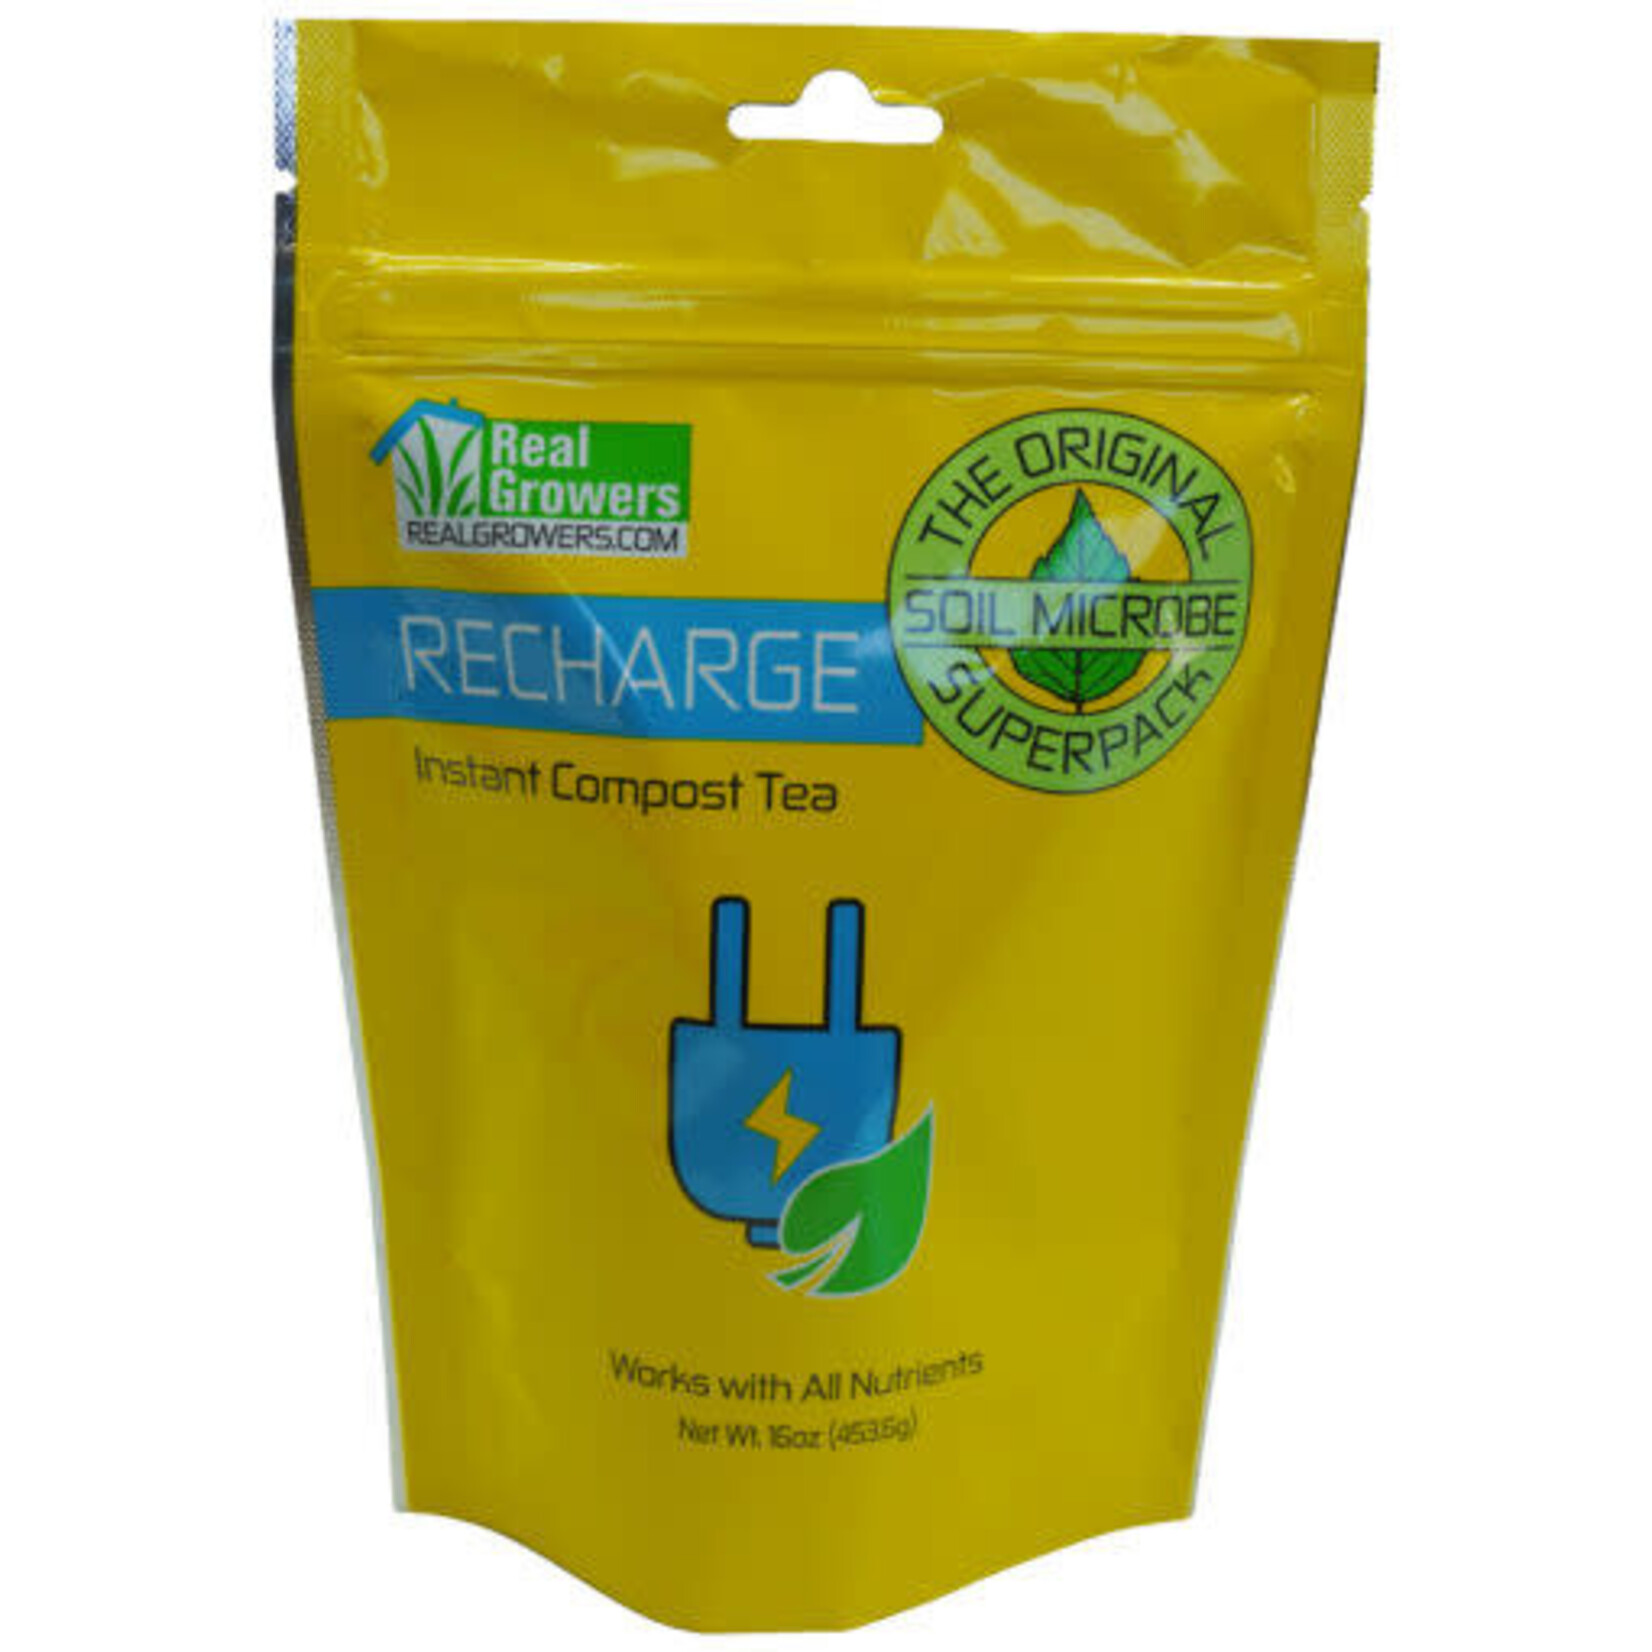 Real Growers Recharge Instant Compost Tea 16oz